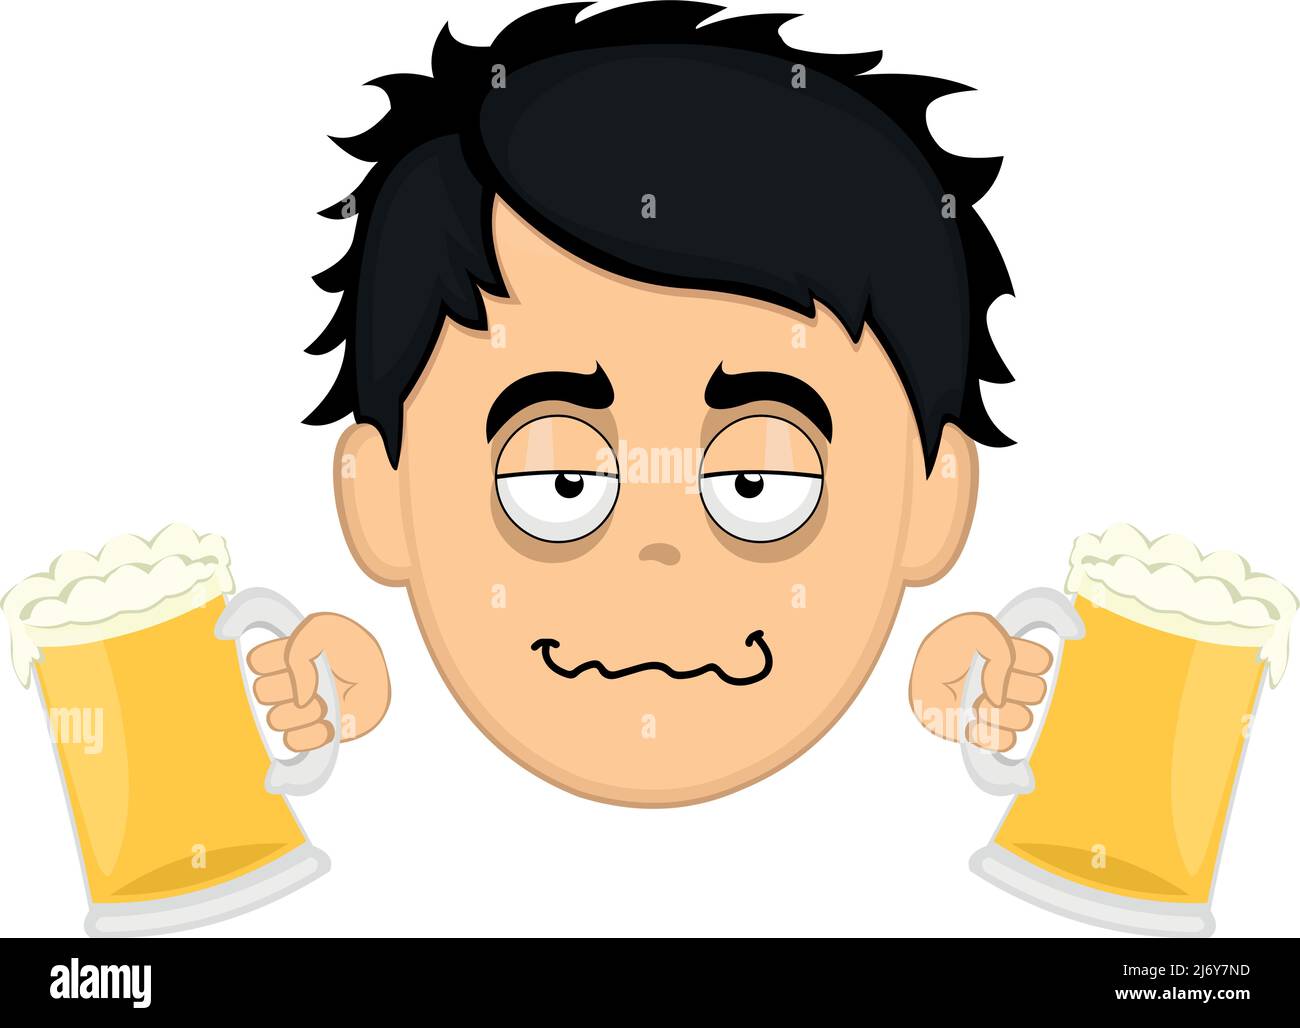 Vector illustration of the face of a drunk cartoon man with beers in his hands Stock Vector